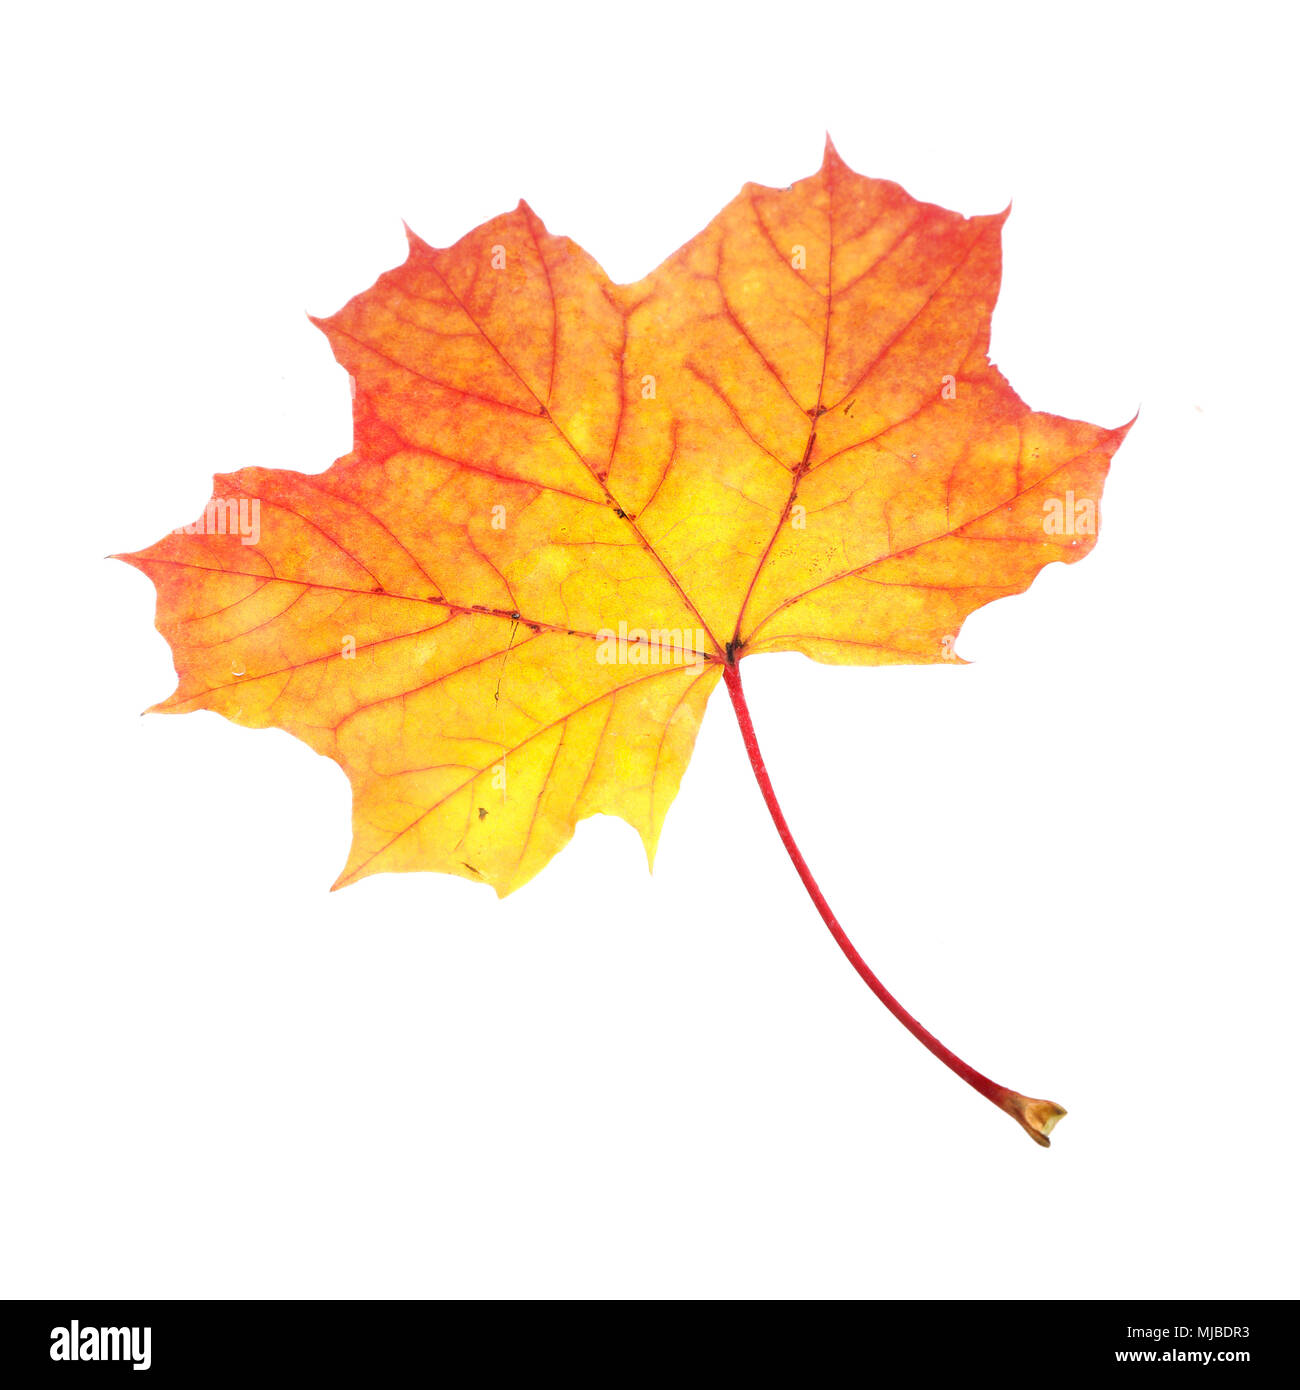 One Maple (Acer platanoides) leaf in autumn colors isolated on white backgrund. Stock Photo